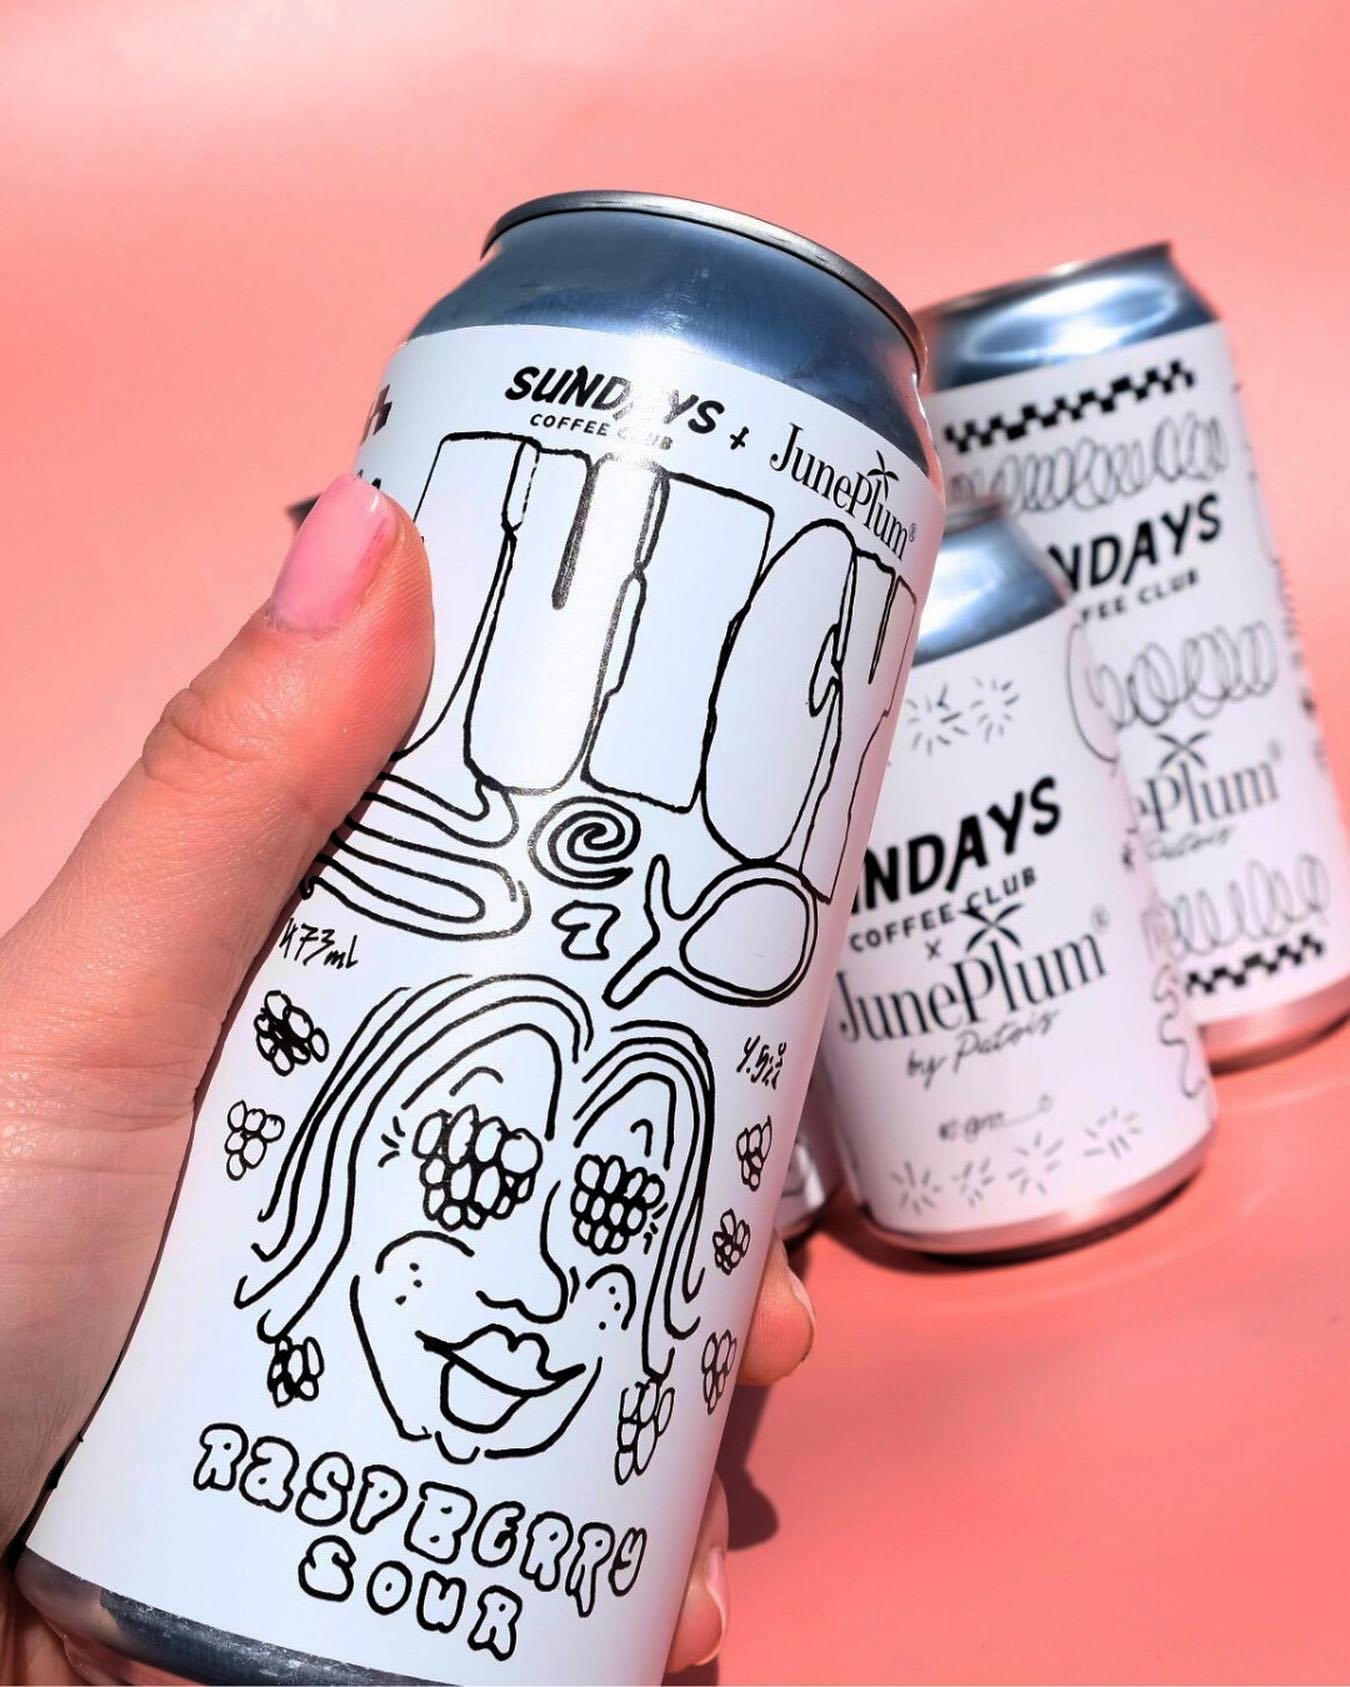 JUICY SIP // raspberry sour 💦

1/3 of our collab beer collection with @sundayscoffee.club 🫶

Now available in store! 

#juneplumxsundays #juneplumto #beer #cheers #collab #sour